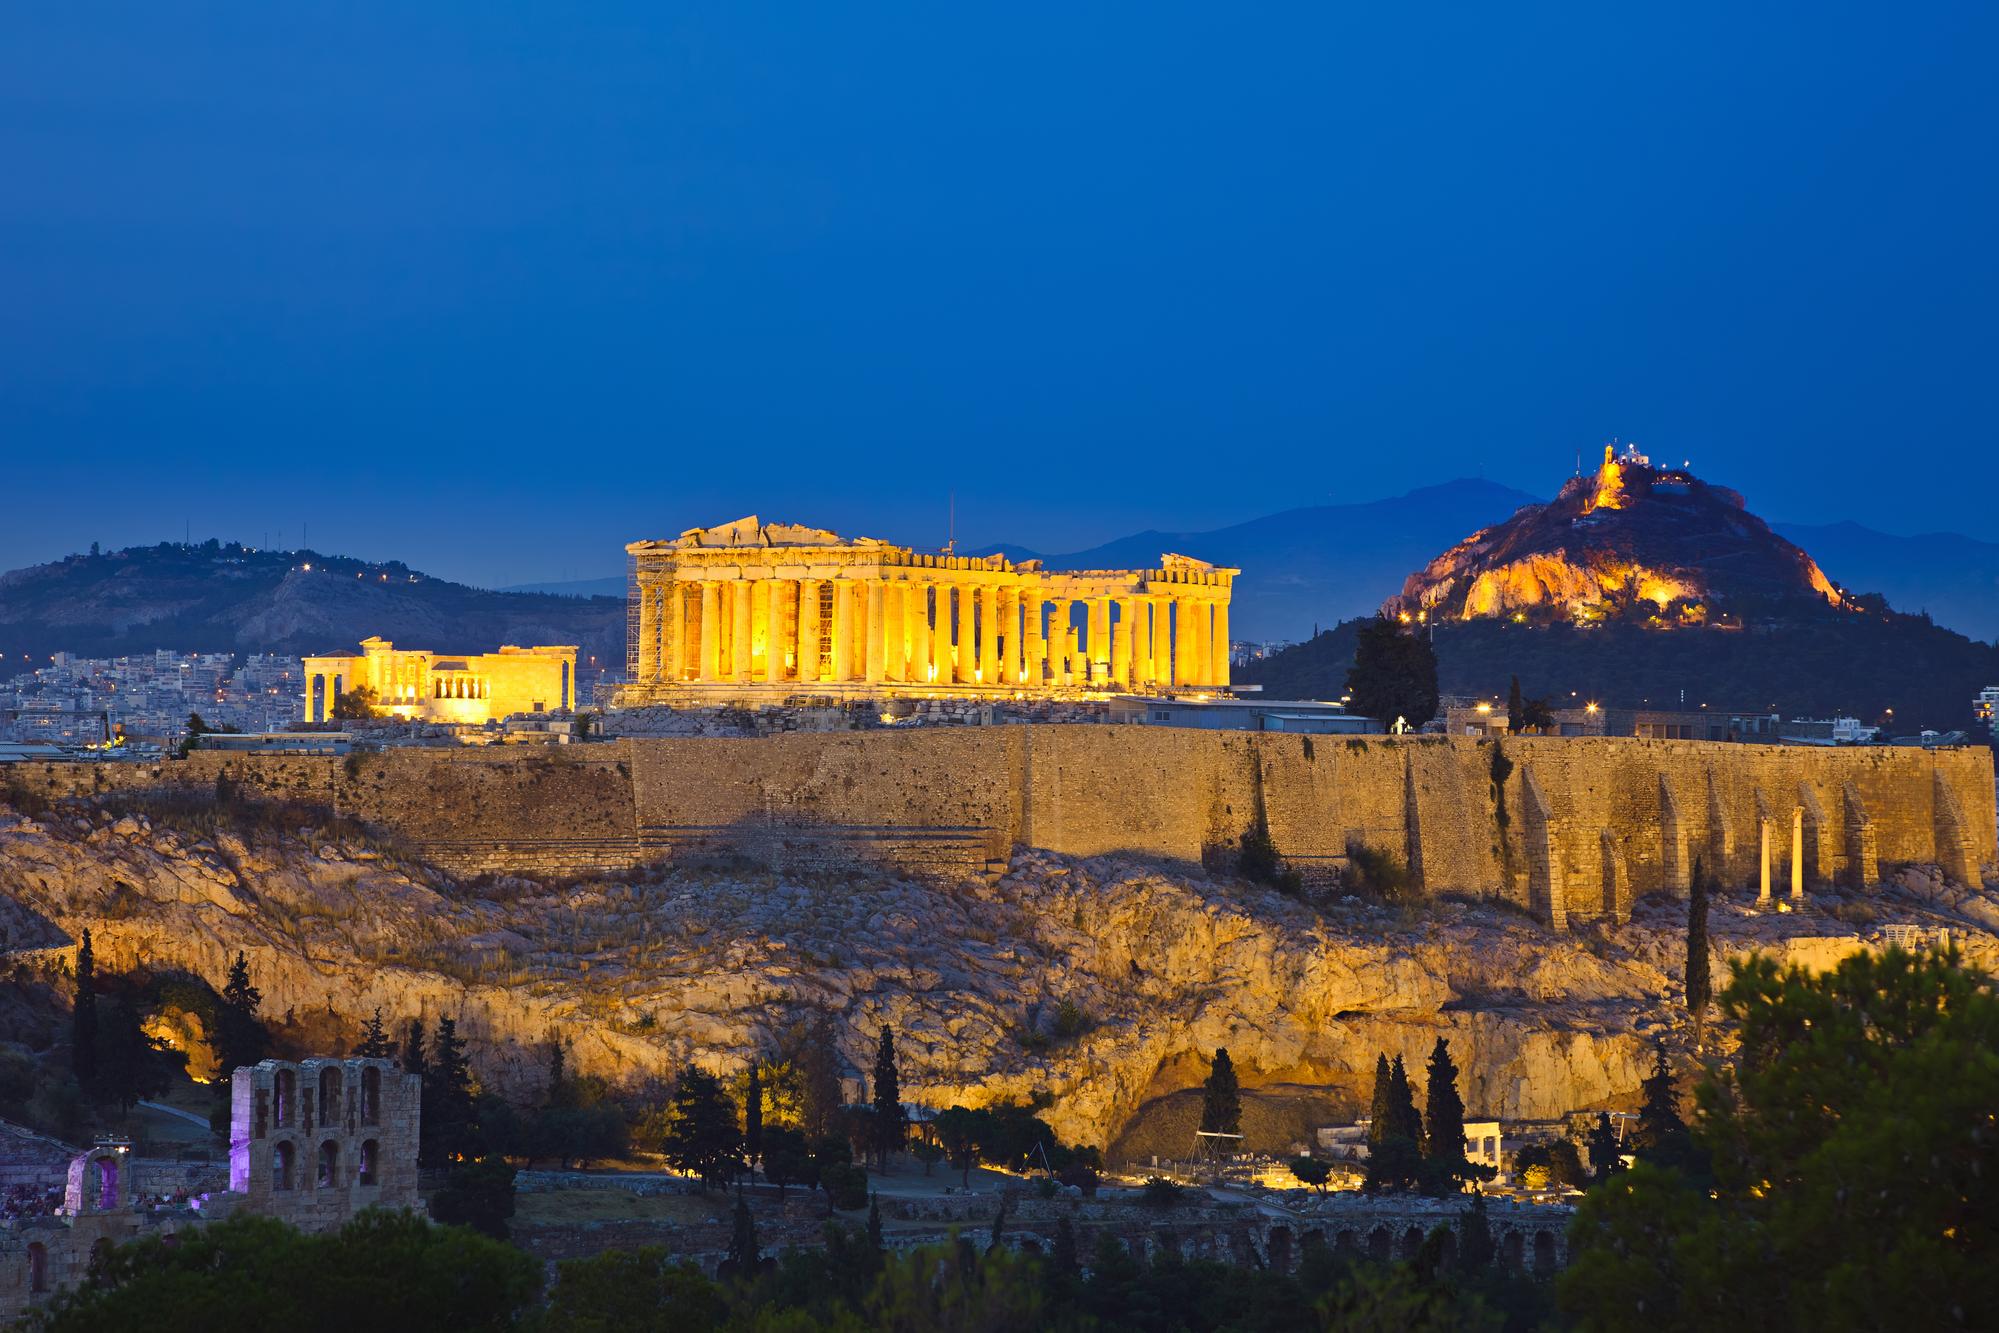 Athens travel guide for first-time visitors - Best Places to Visit in Europe - planningforeurope.com (4)